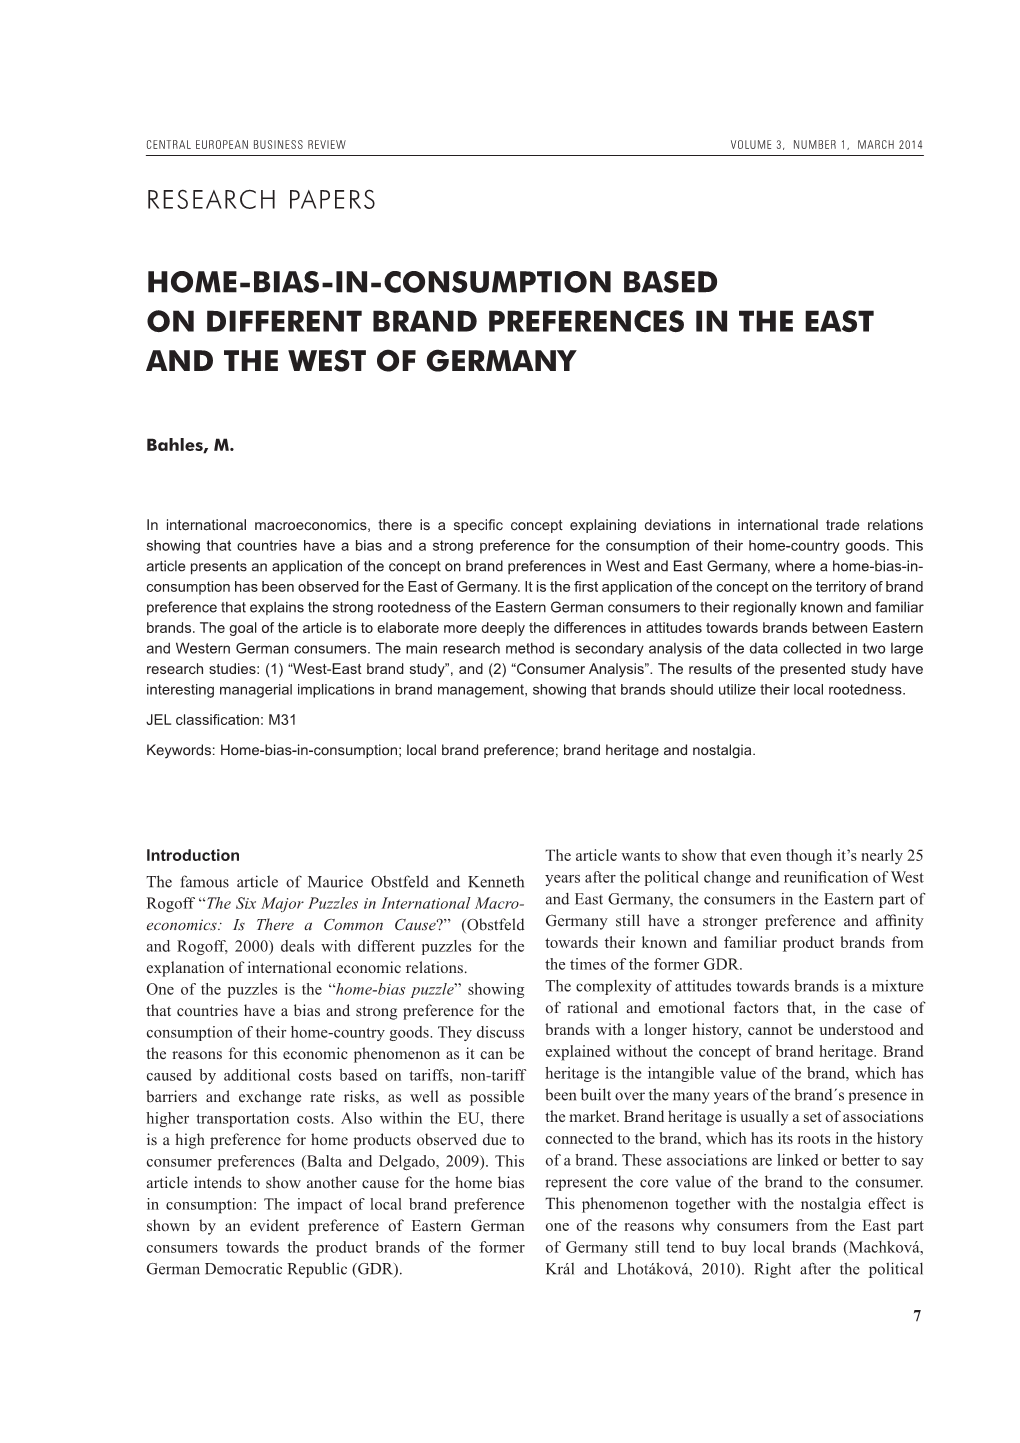 Home-Bias-In-Consumption Based on Different Brand Preferences in the East and the West of Germany